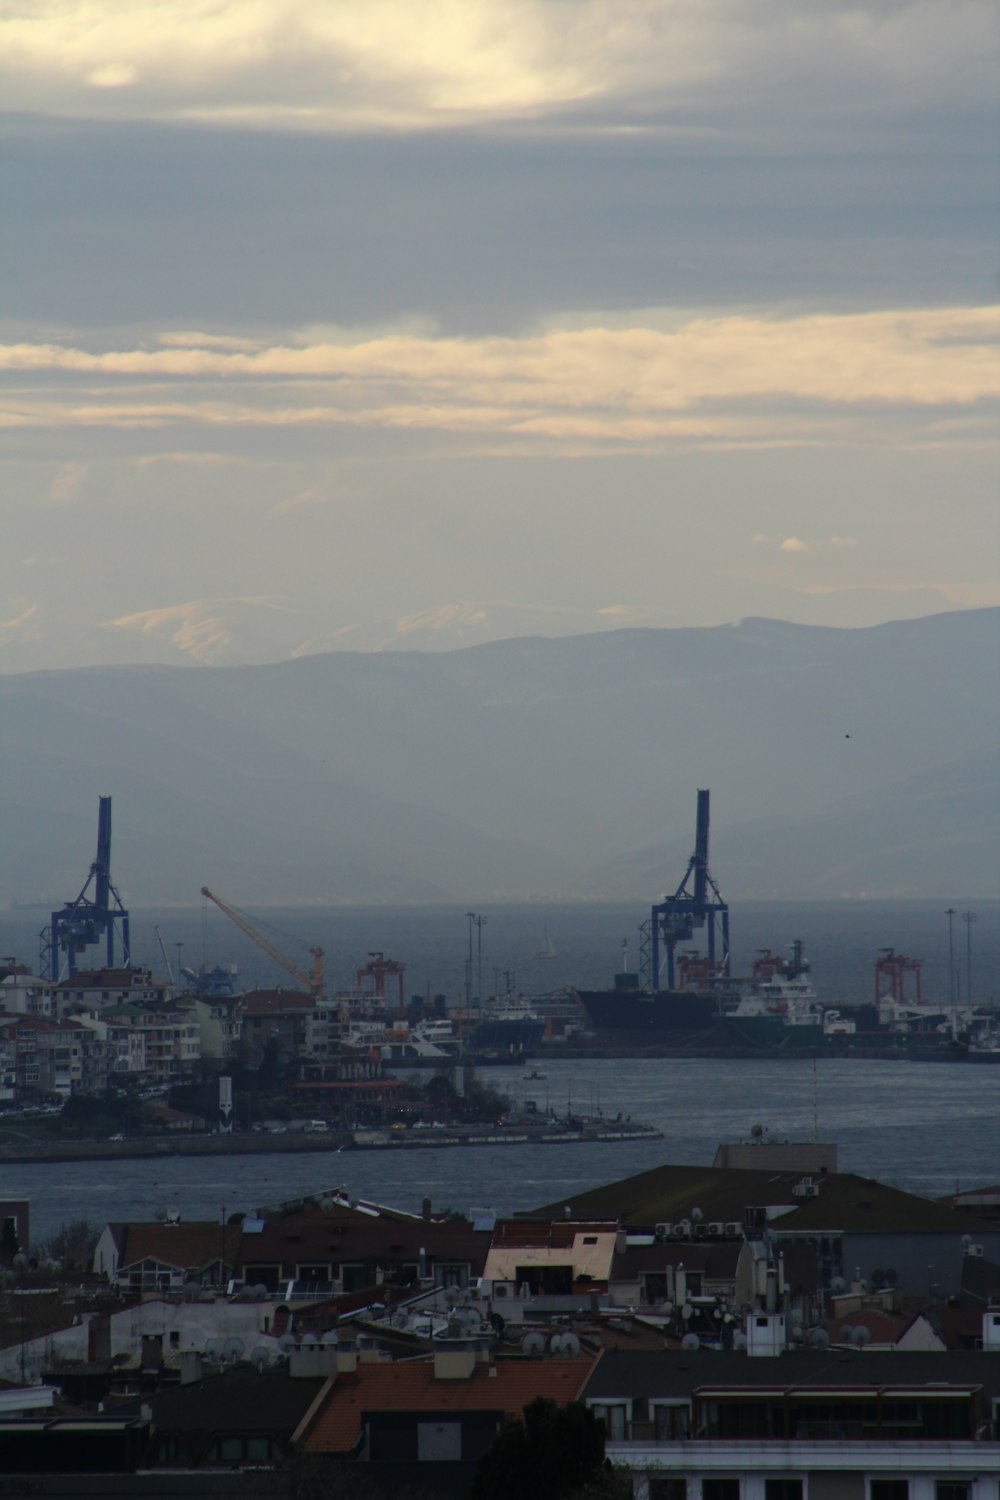 a view of a harbor with ships in the distance